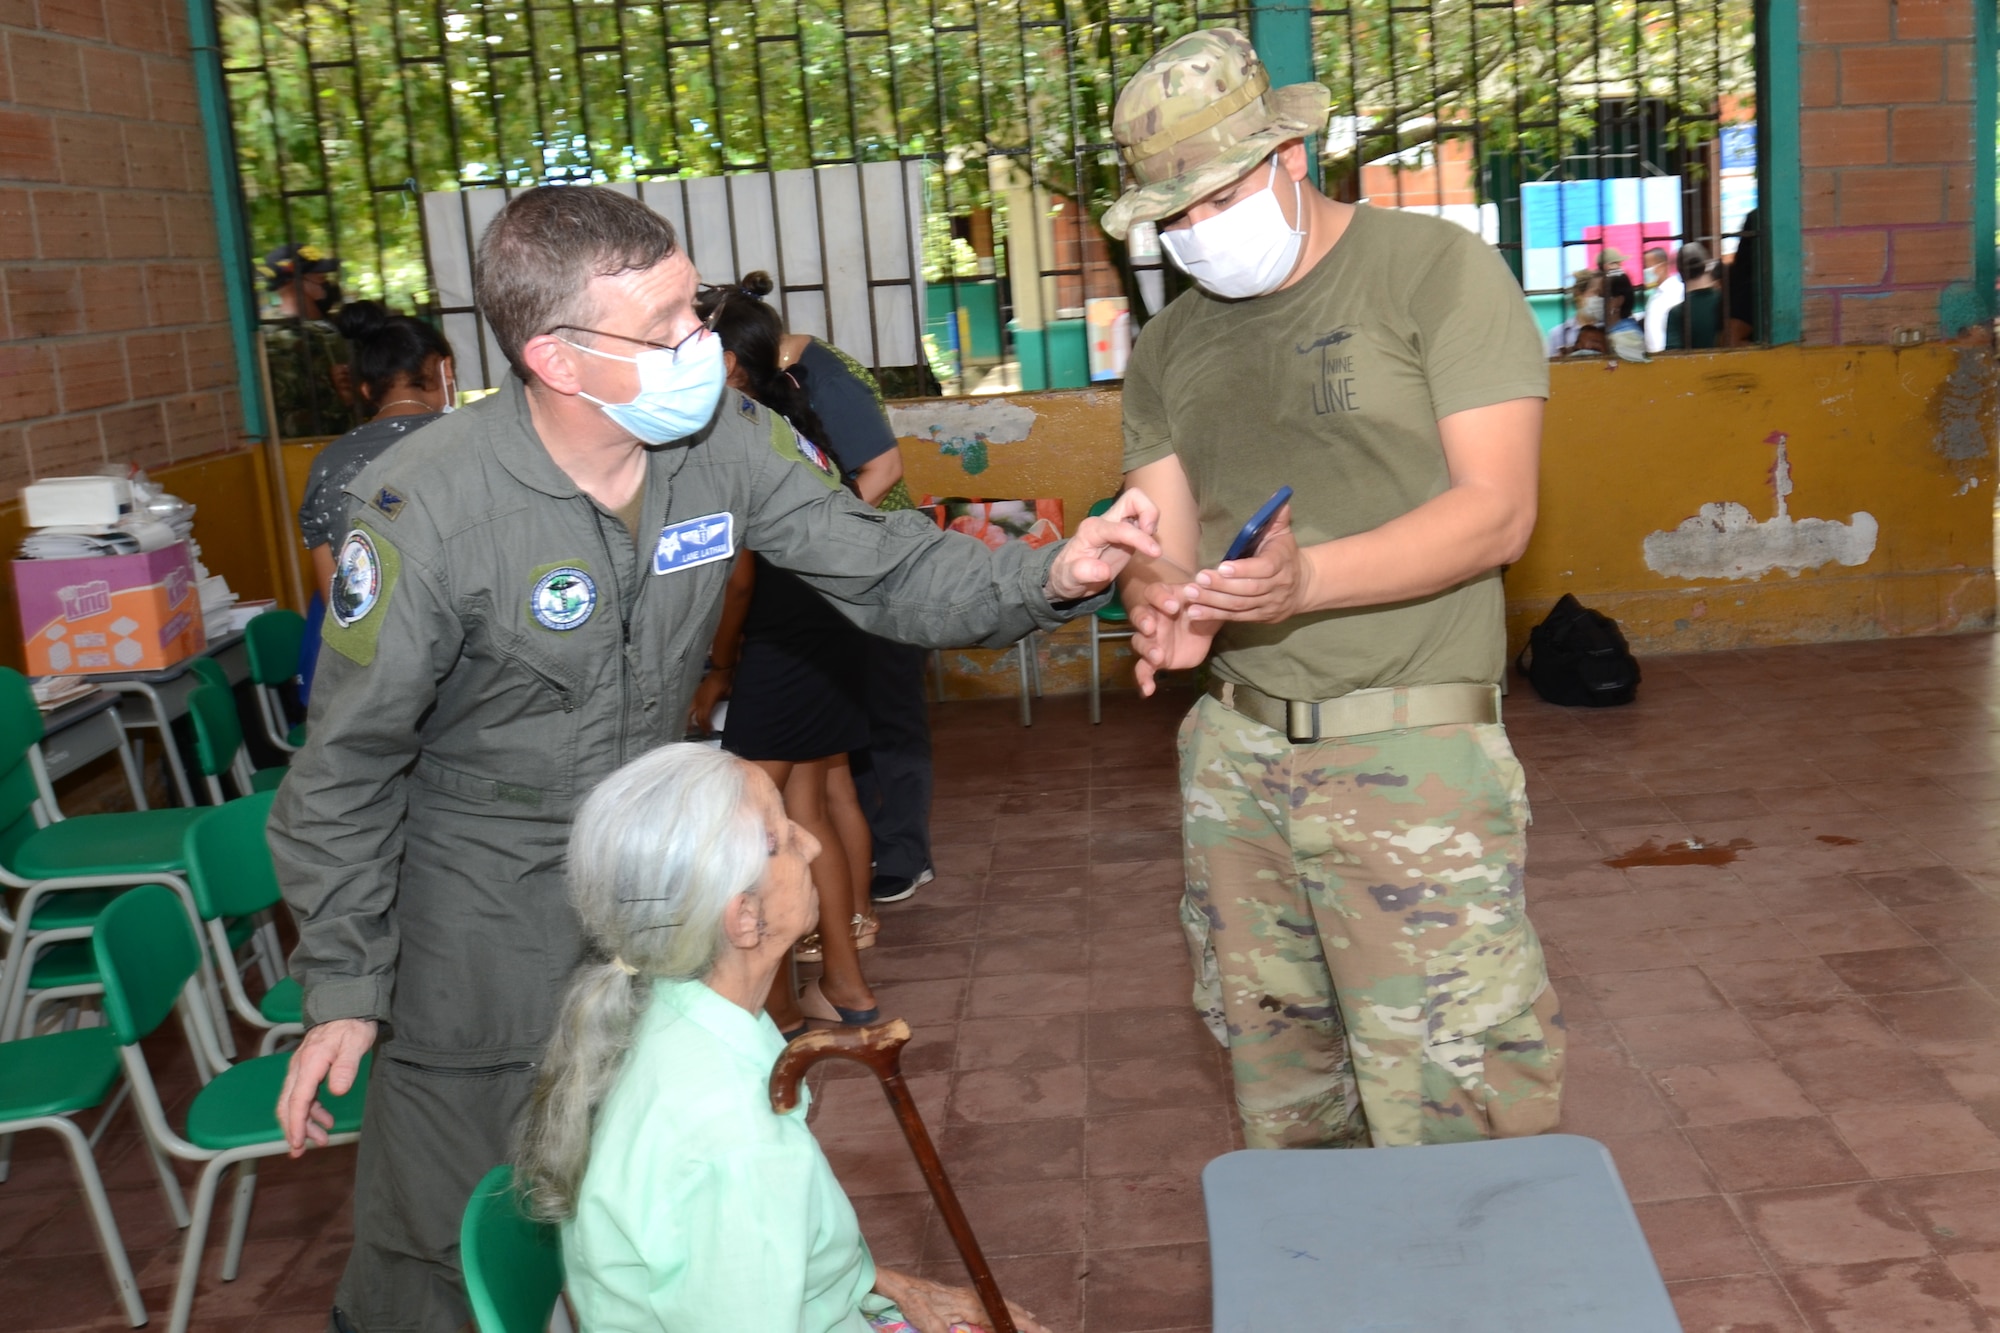 U.S. Air Force Col. Phillip Latham (left), 169th Medical Group Commander, and U.S. Army Specialist Pablo Morales, a medic, examine a Colombian patient Sepember 4, 2021. South Carolina National Guard medical personnel later traveled to the remote town of Tamana, Colombia to participate in a real-word community medical and humanitarian support mission. While there, the medical personnel provided dental, optical, dermatology, pharmacy and general medical care to more than 300 patients. South Carolina Air National Guard and South Carolina Army National Guard medical personnel participate in the regional Ángel de los Andes (Angel of the Andes) and Cooperación VII exercises in Colombia August 30 to September 10, 2021. The exercises provide training opportunities with South Carolina’s state partner Colombia in realistic combat search and rescue missions as well as humanitarian aid and disaster response scenarios such as earthquakes and tsunamis. (U.S. Air National Guard photo by Lt. Col. Jim St.Clair, 169th Fighter Wing Public Affairs)